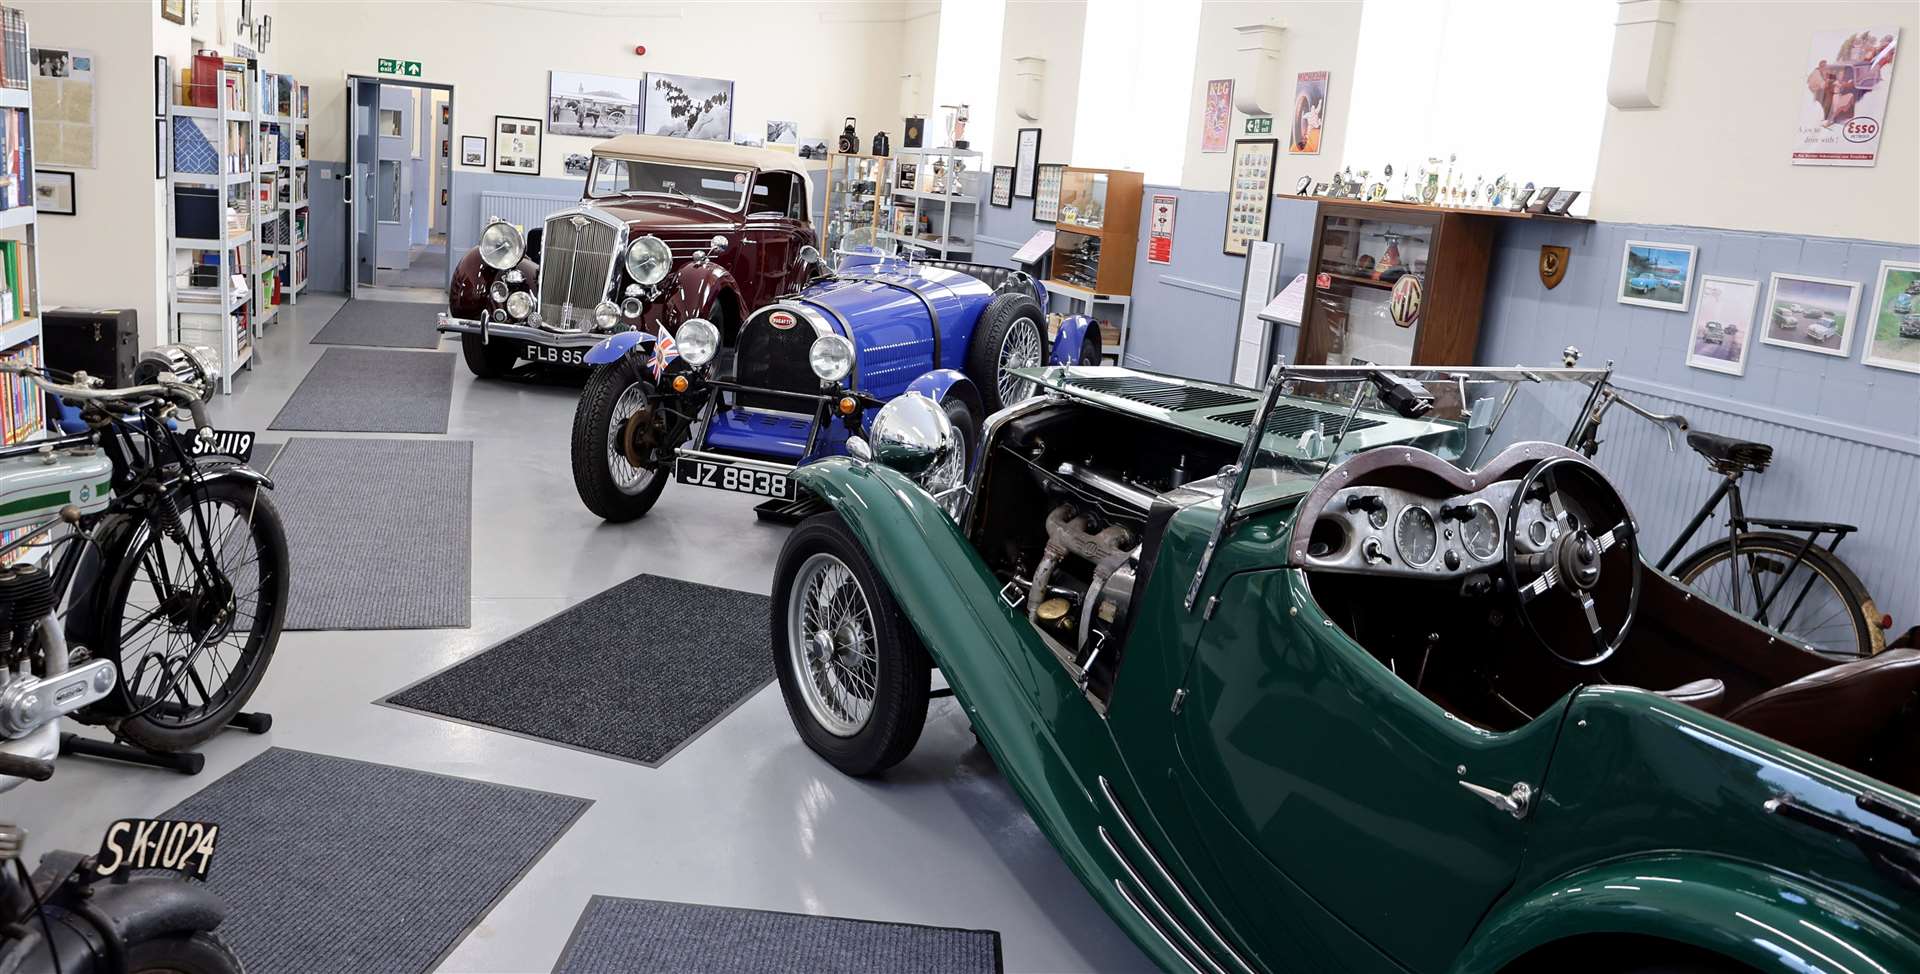 Inside the heritage motor centre, photographed by James Gunn.